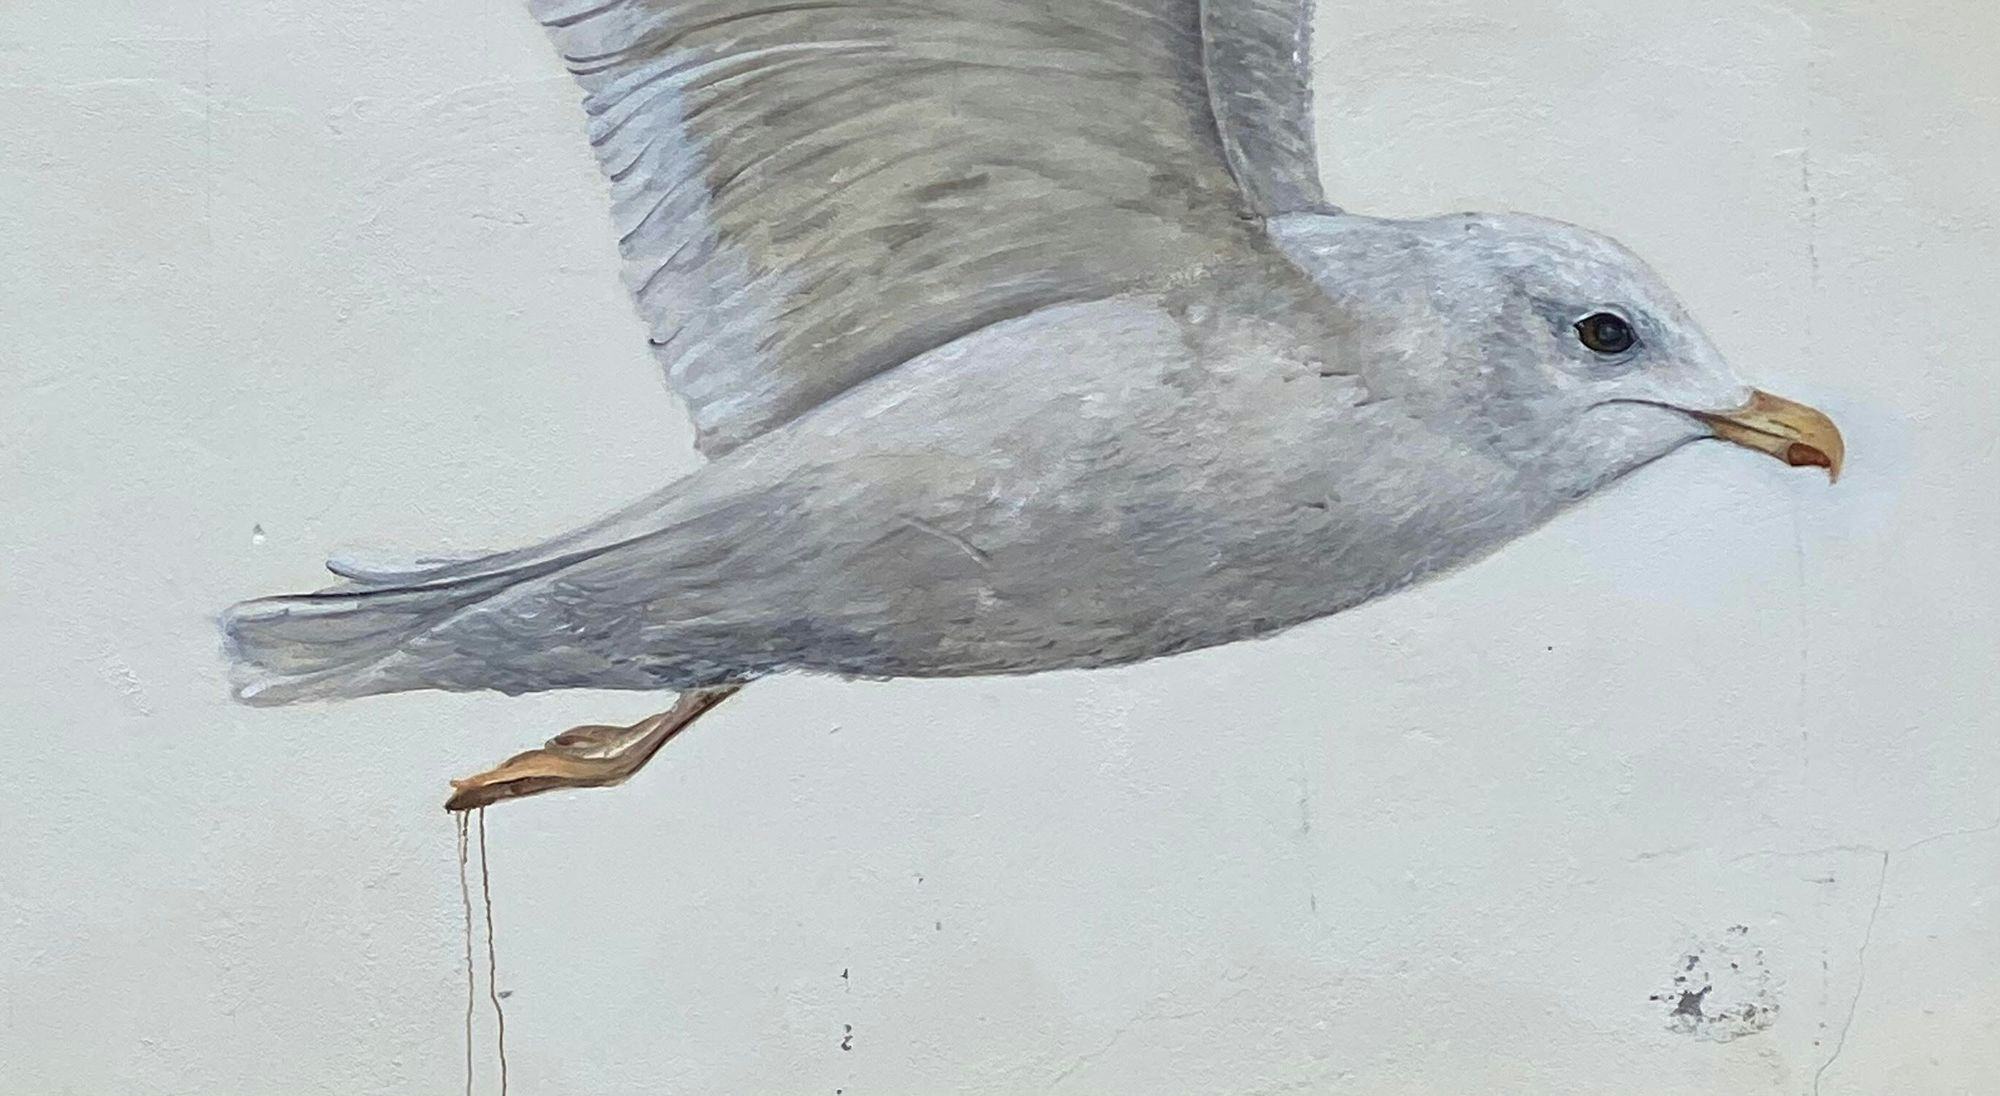 A close up of a painted seagull in flight